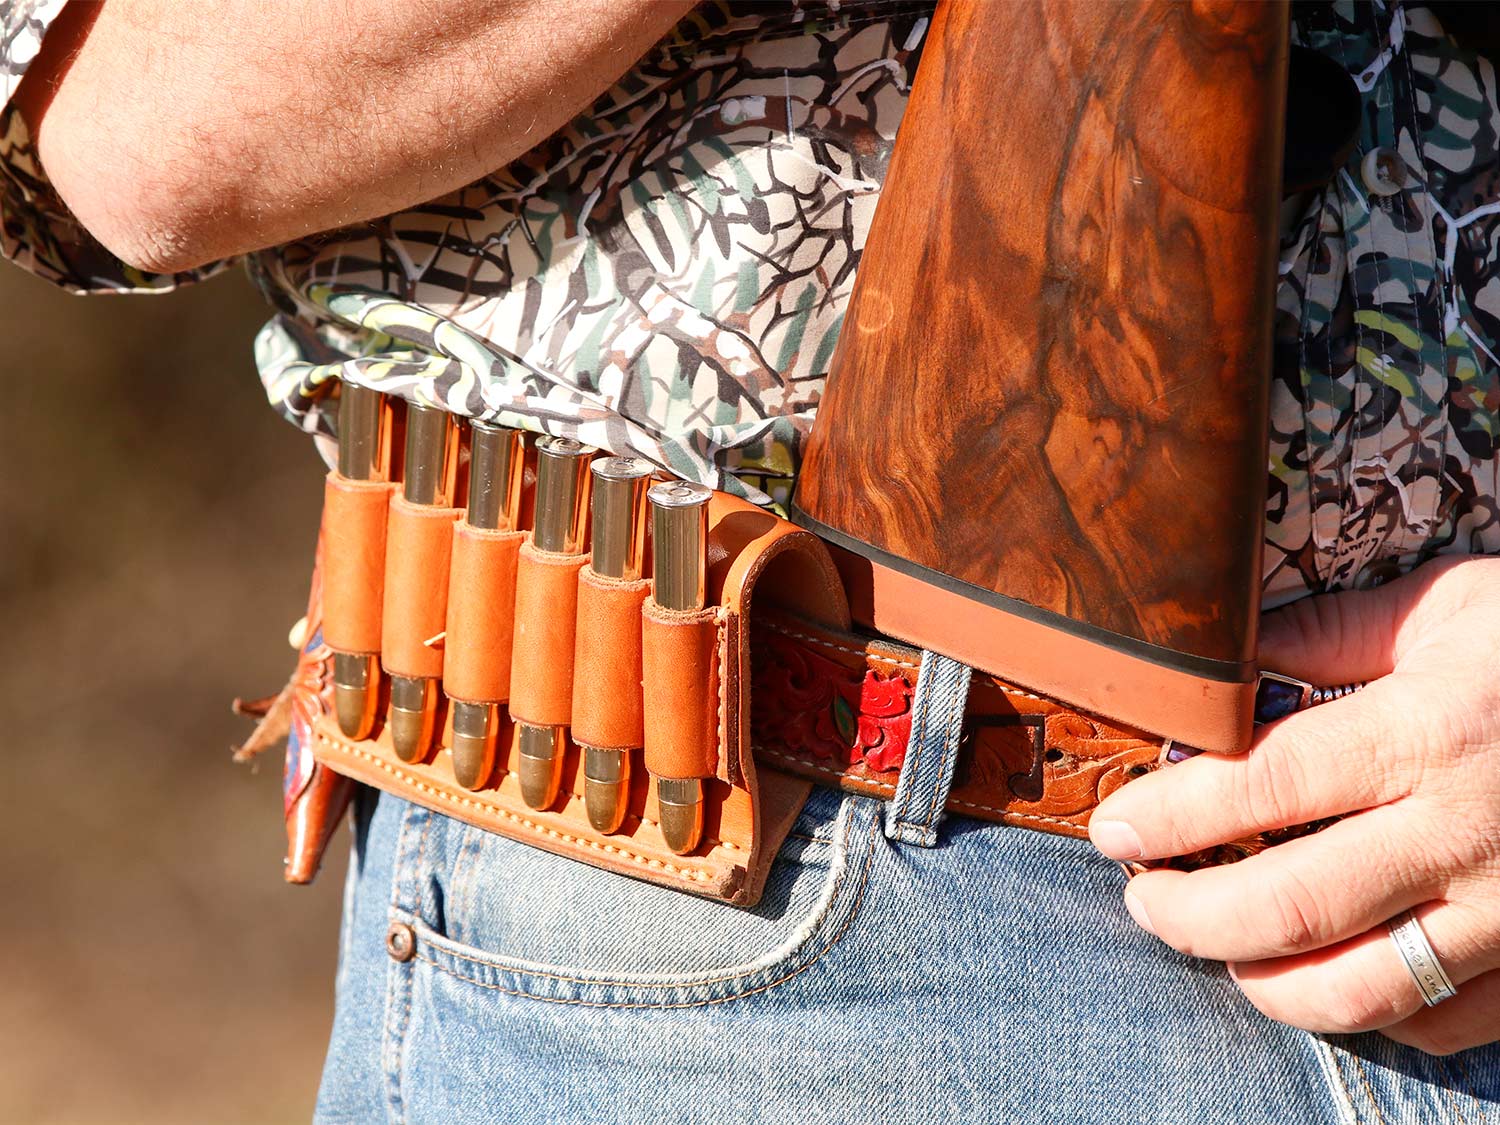 A belt loaded with ammo rounds.